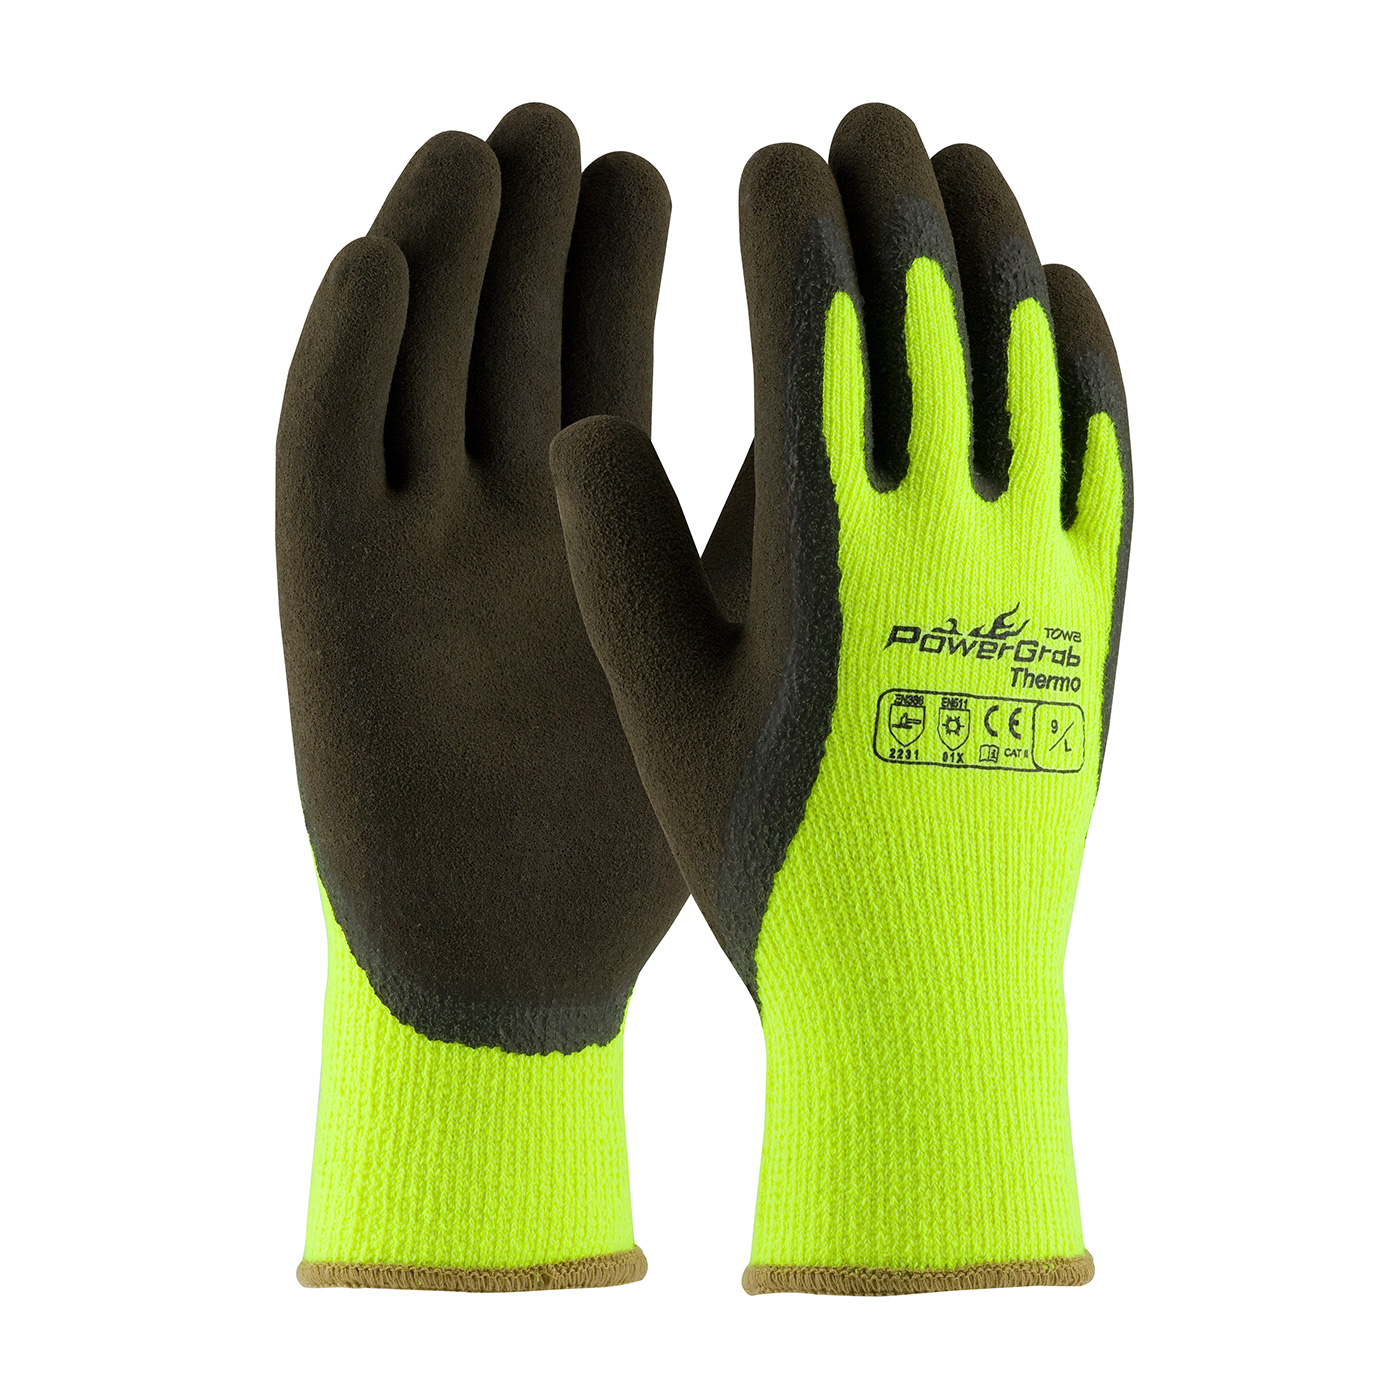 #41-1405 PIP® Hi-Vis Lime PowerGrab™ Thermo Coated Winter Work Gloves with Latex Microfinish™ Grip,